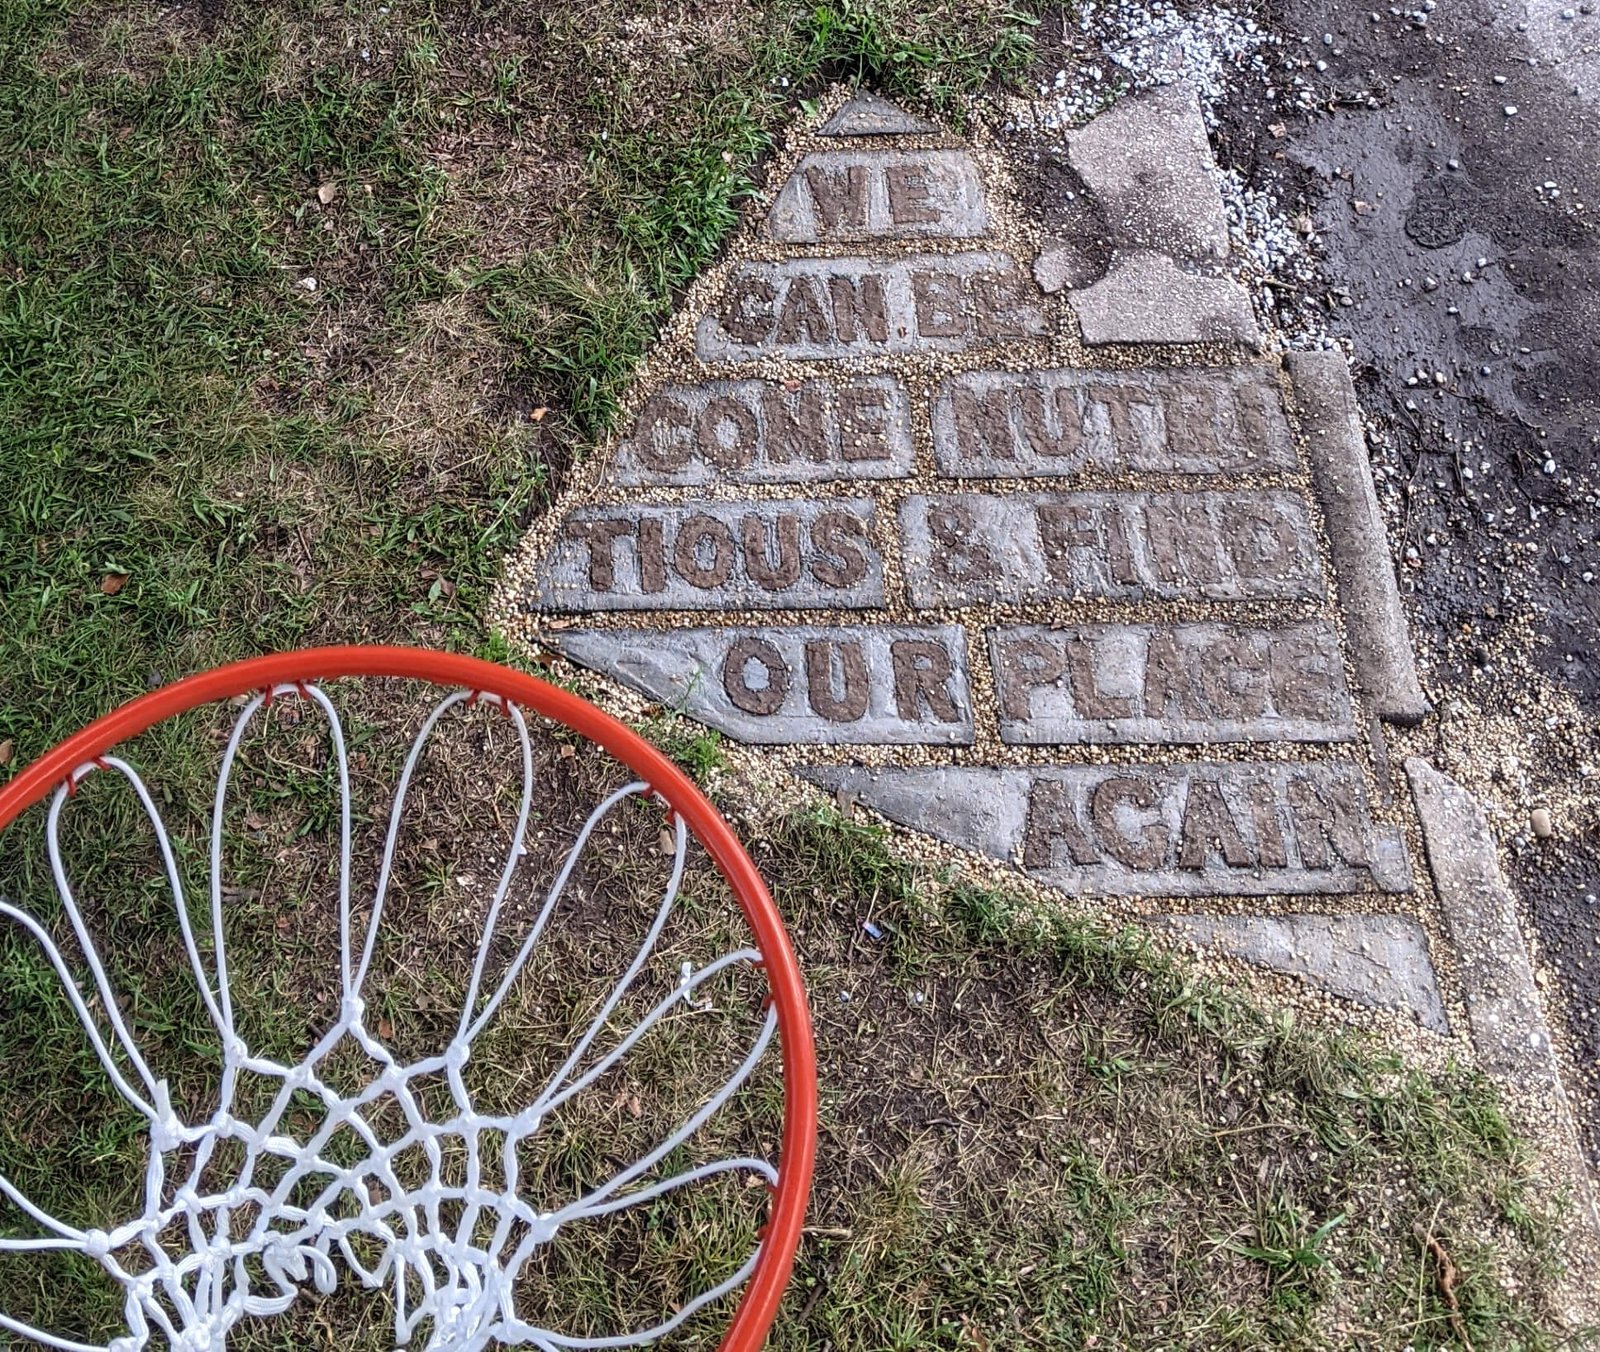 3 people play basketball on a concrete free throw lane that has text carved into it. A small house holds two more basketballs. A garden and a purple martin house.